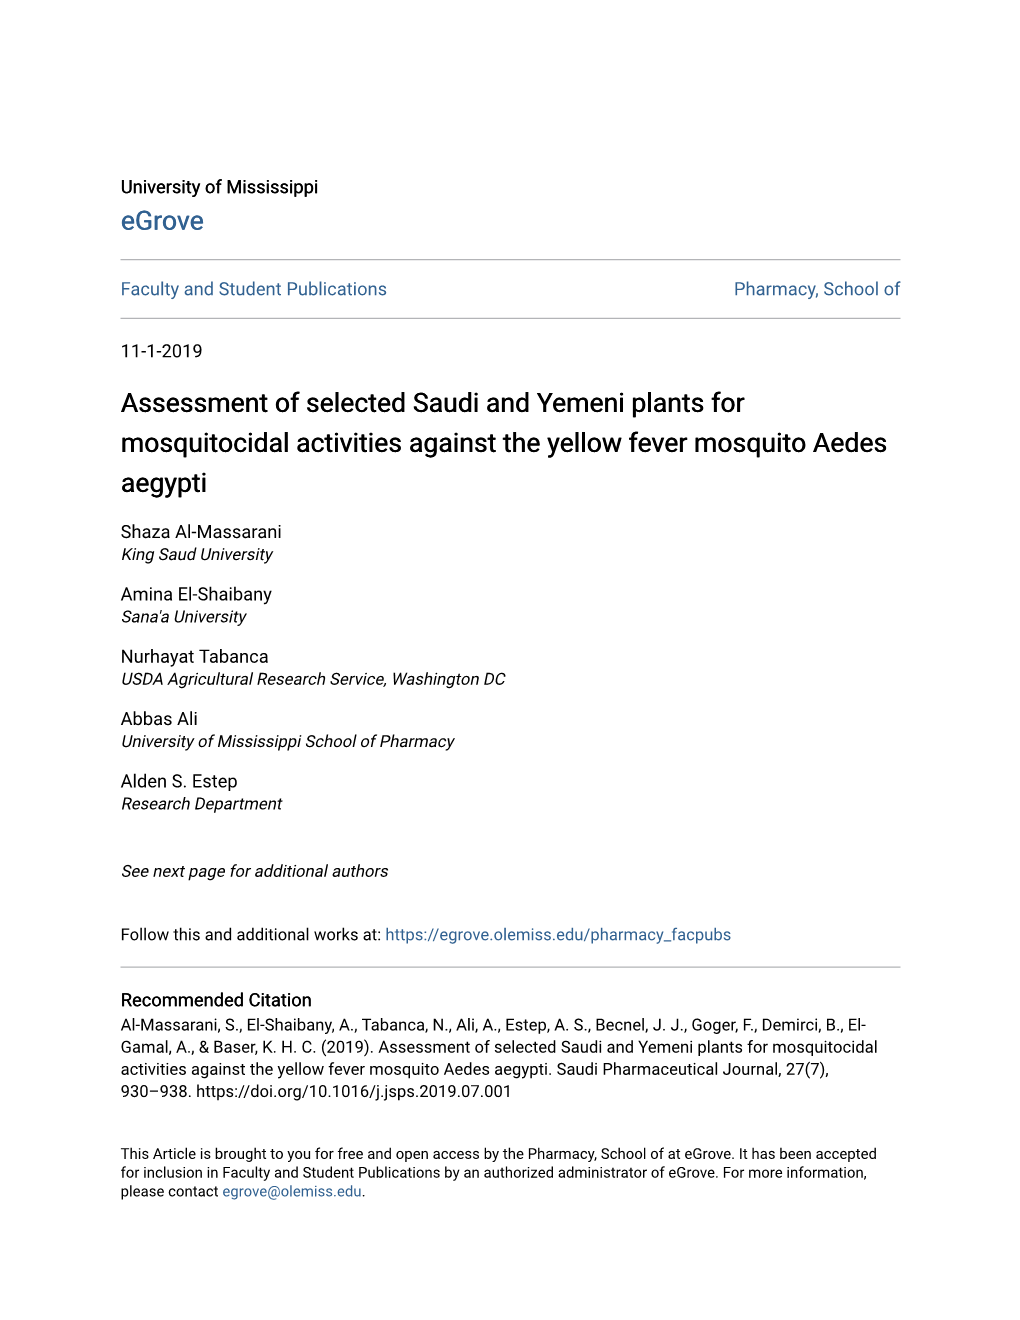 Assessment of Selected Saudi and Yemeni Plants for Mosquitocidal Activities Against the Yellow Fever Mosquito Aedes Aegypti